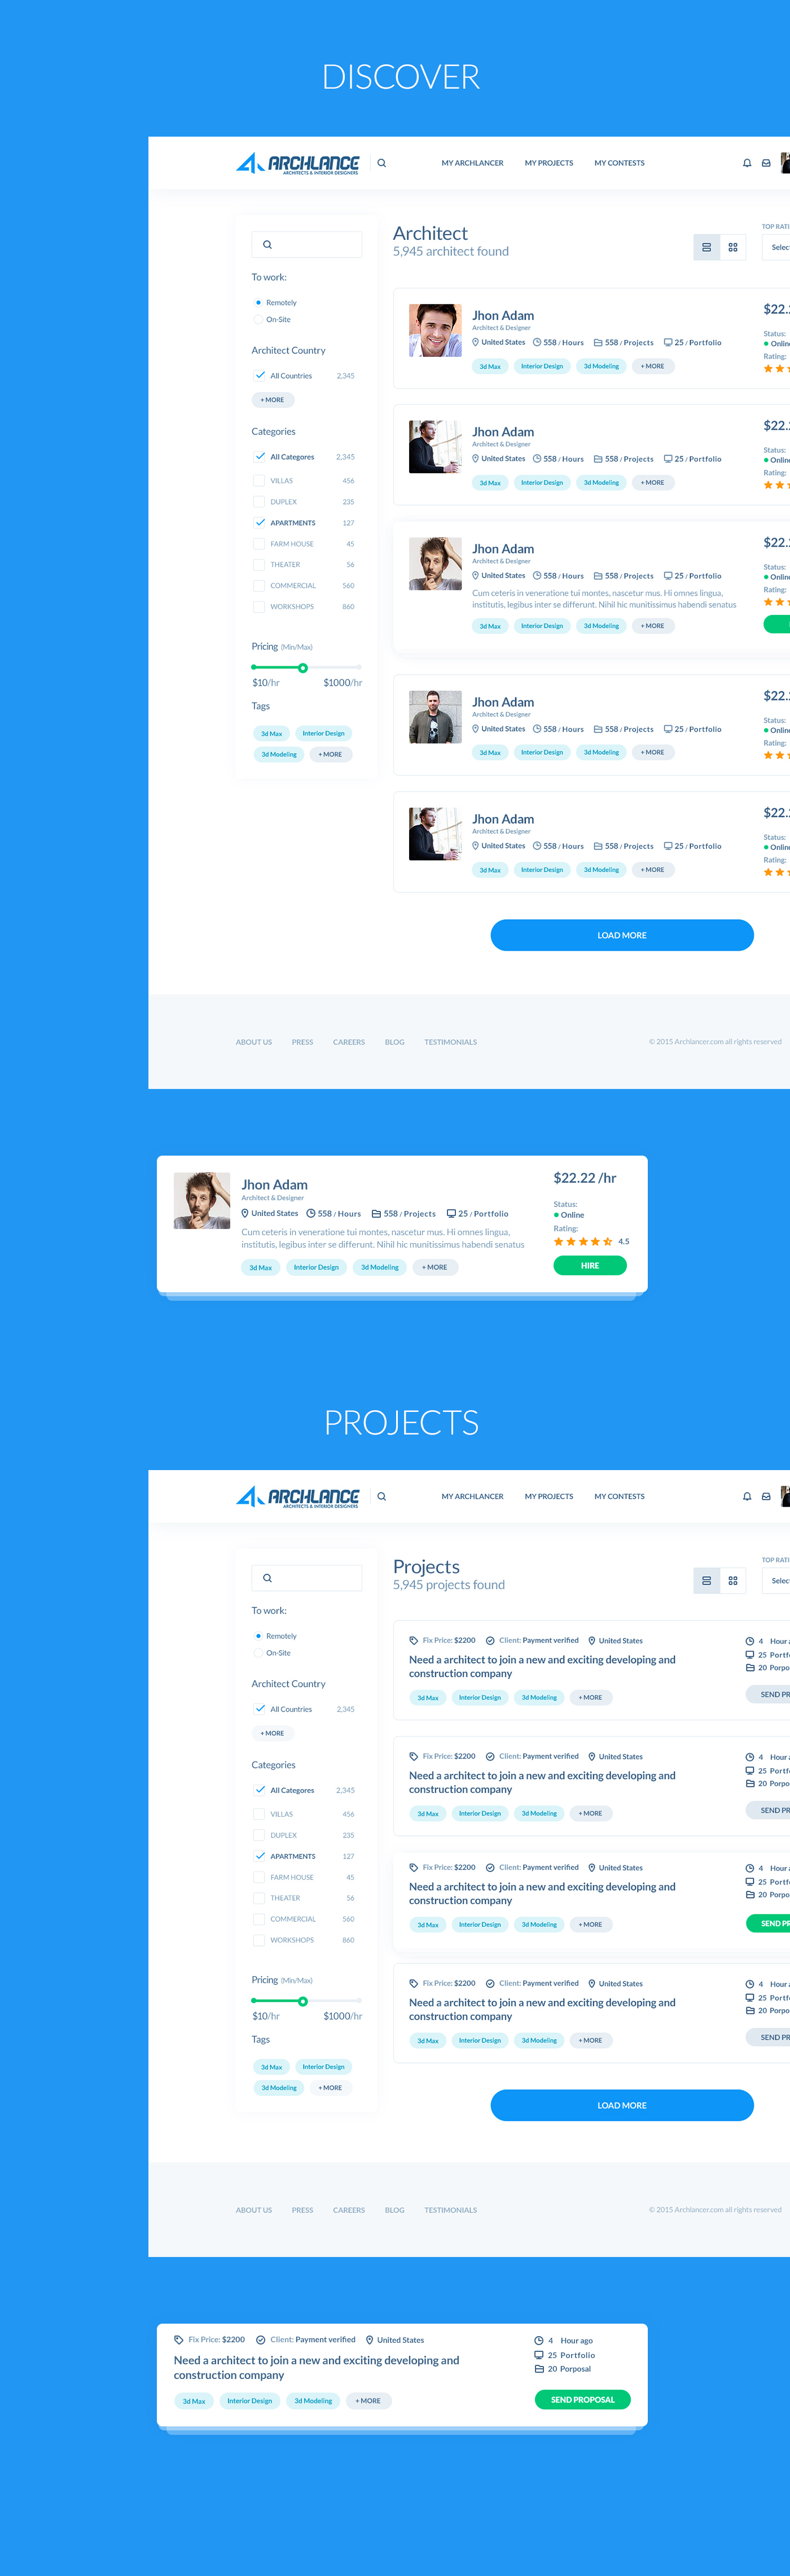 homepage icons flat design flat property illistrations sign up Upwork Freelance interaction